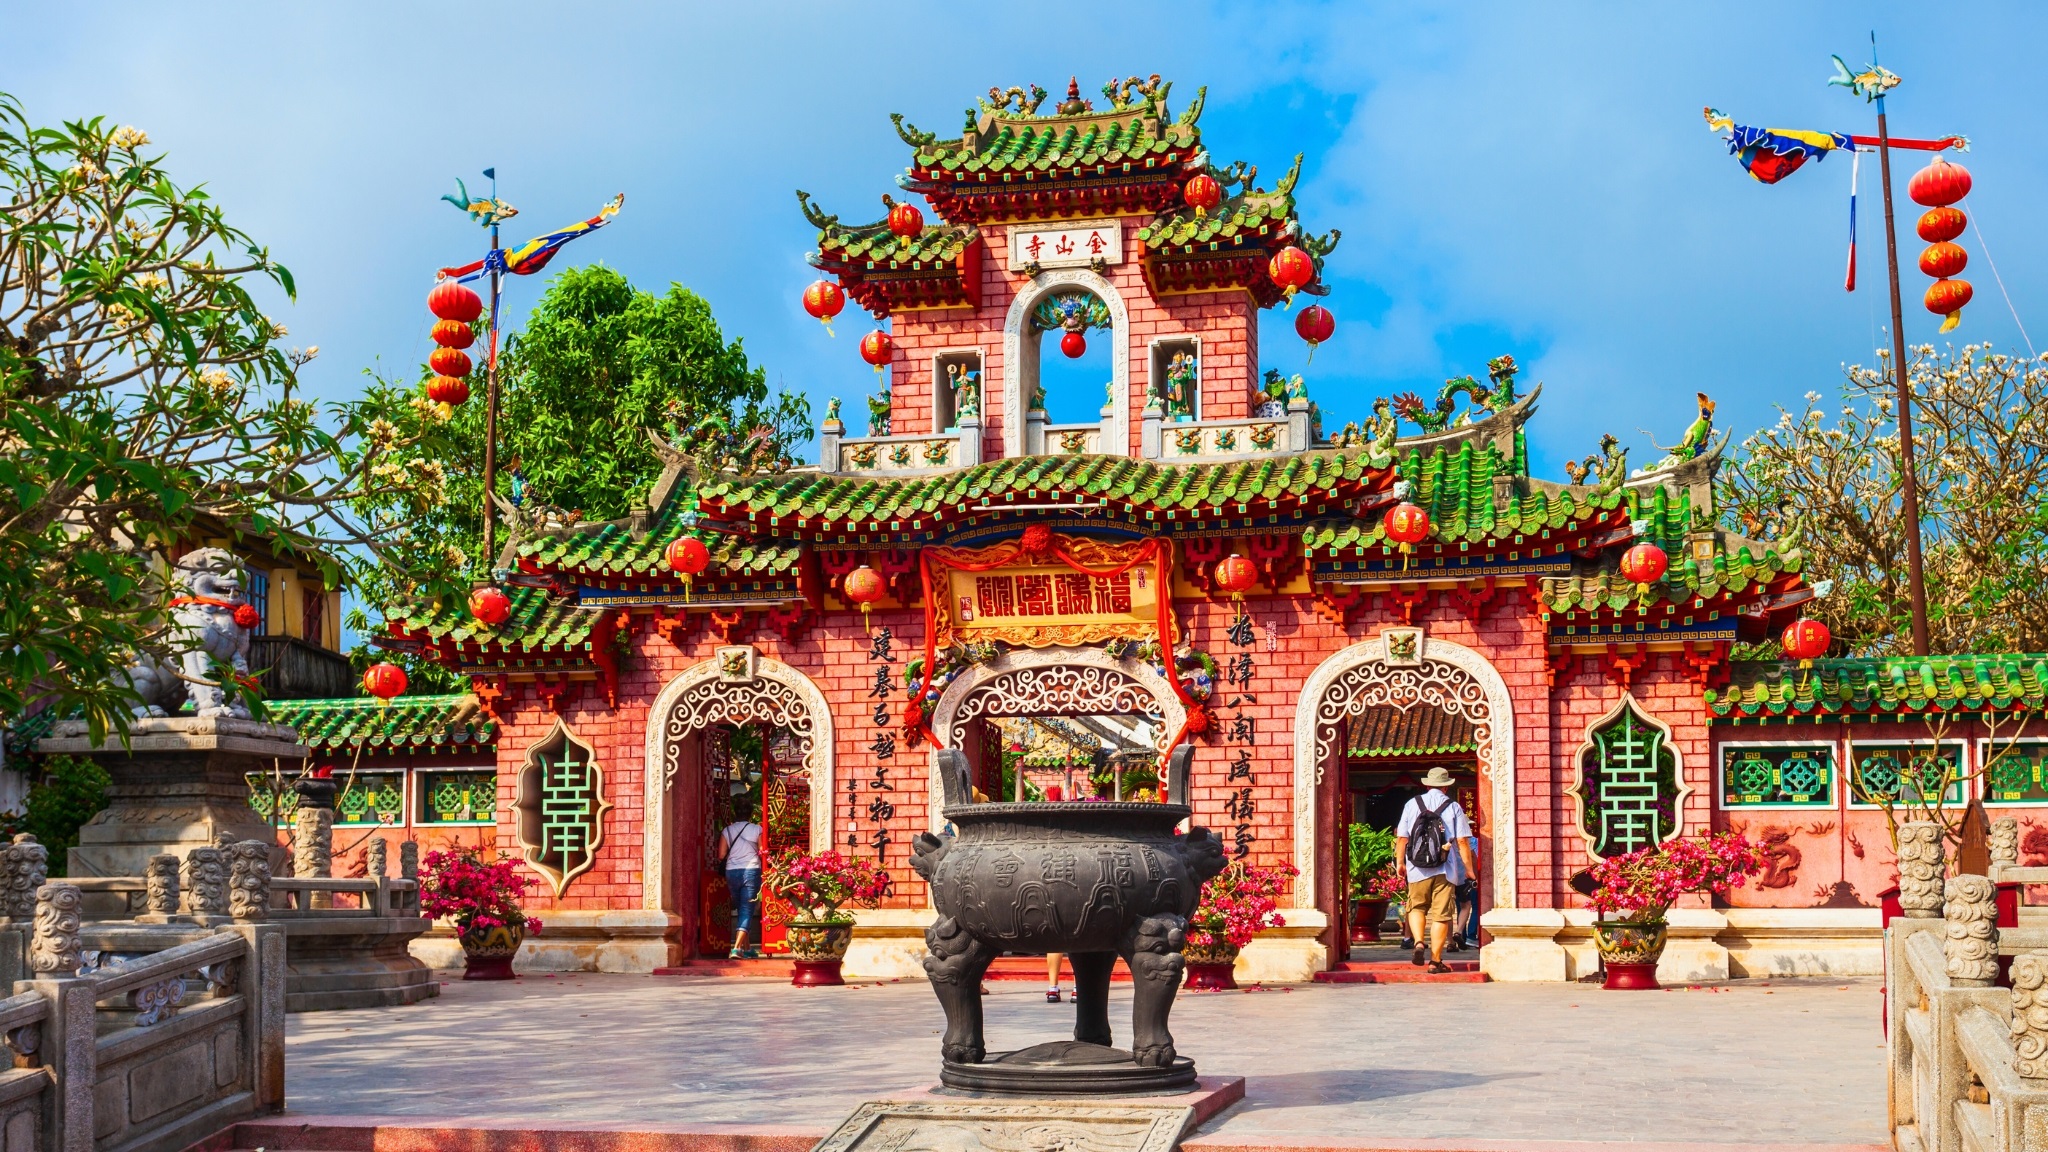 Fujian Assembly Hall Is One Of The Five Famous Assembly Halls In Hoi An